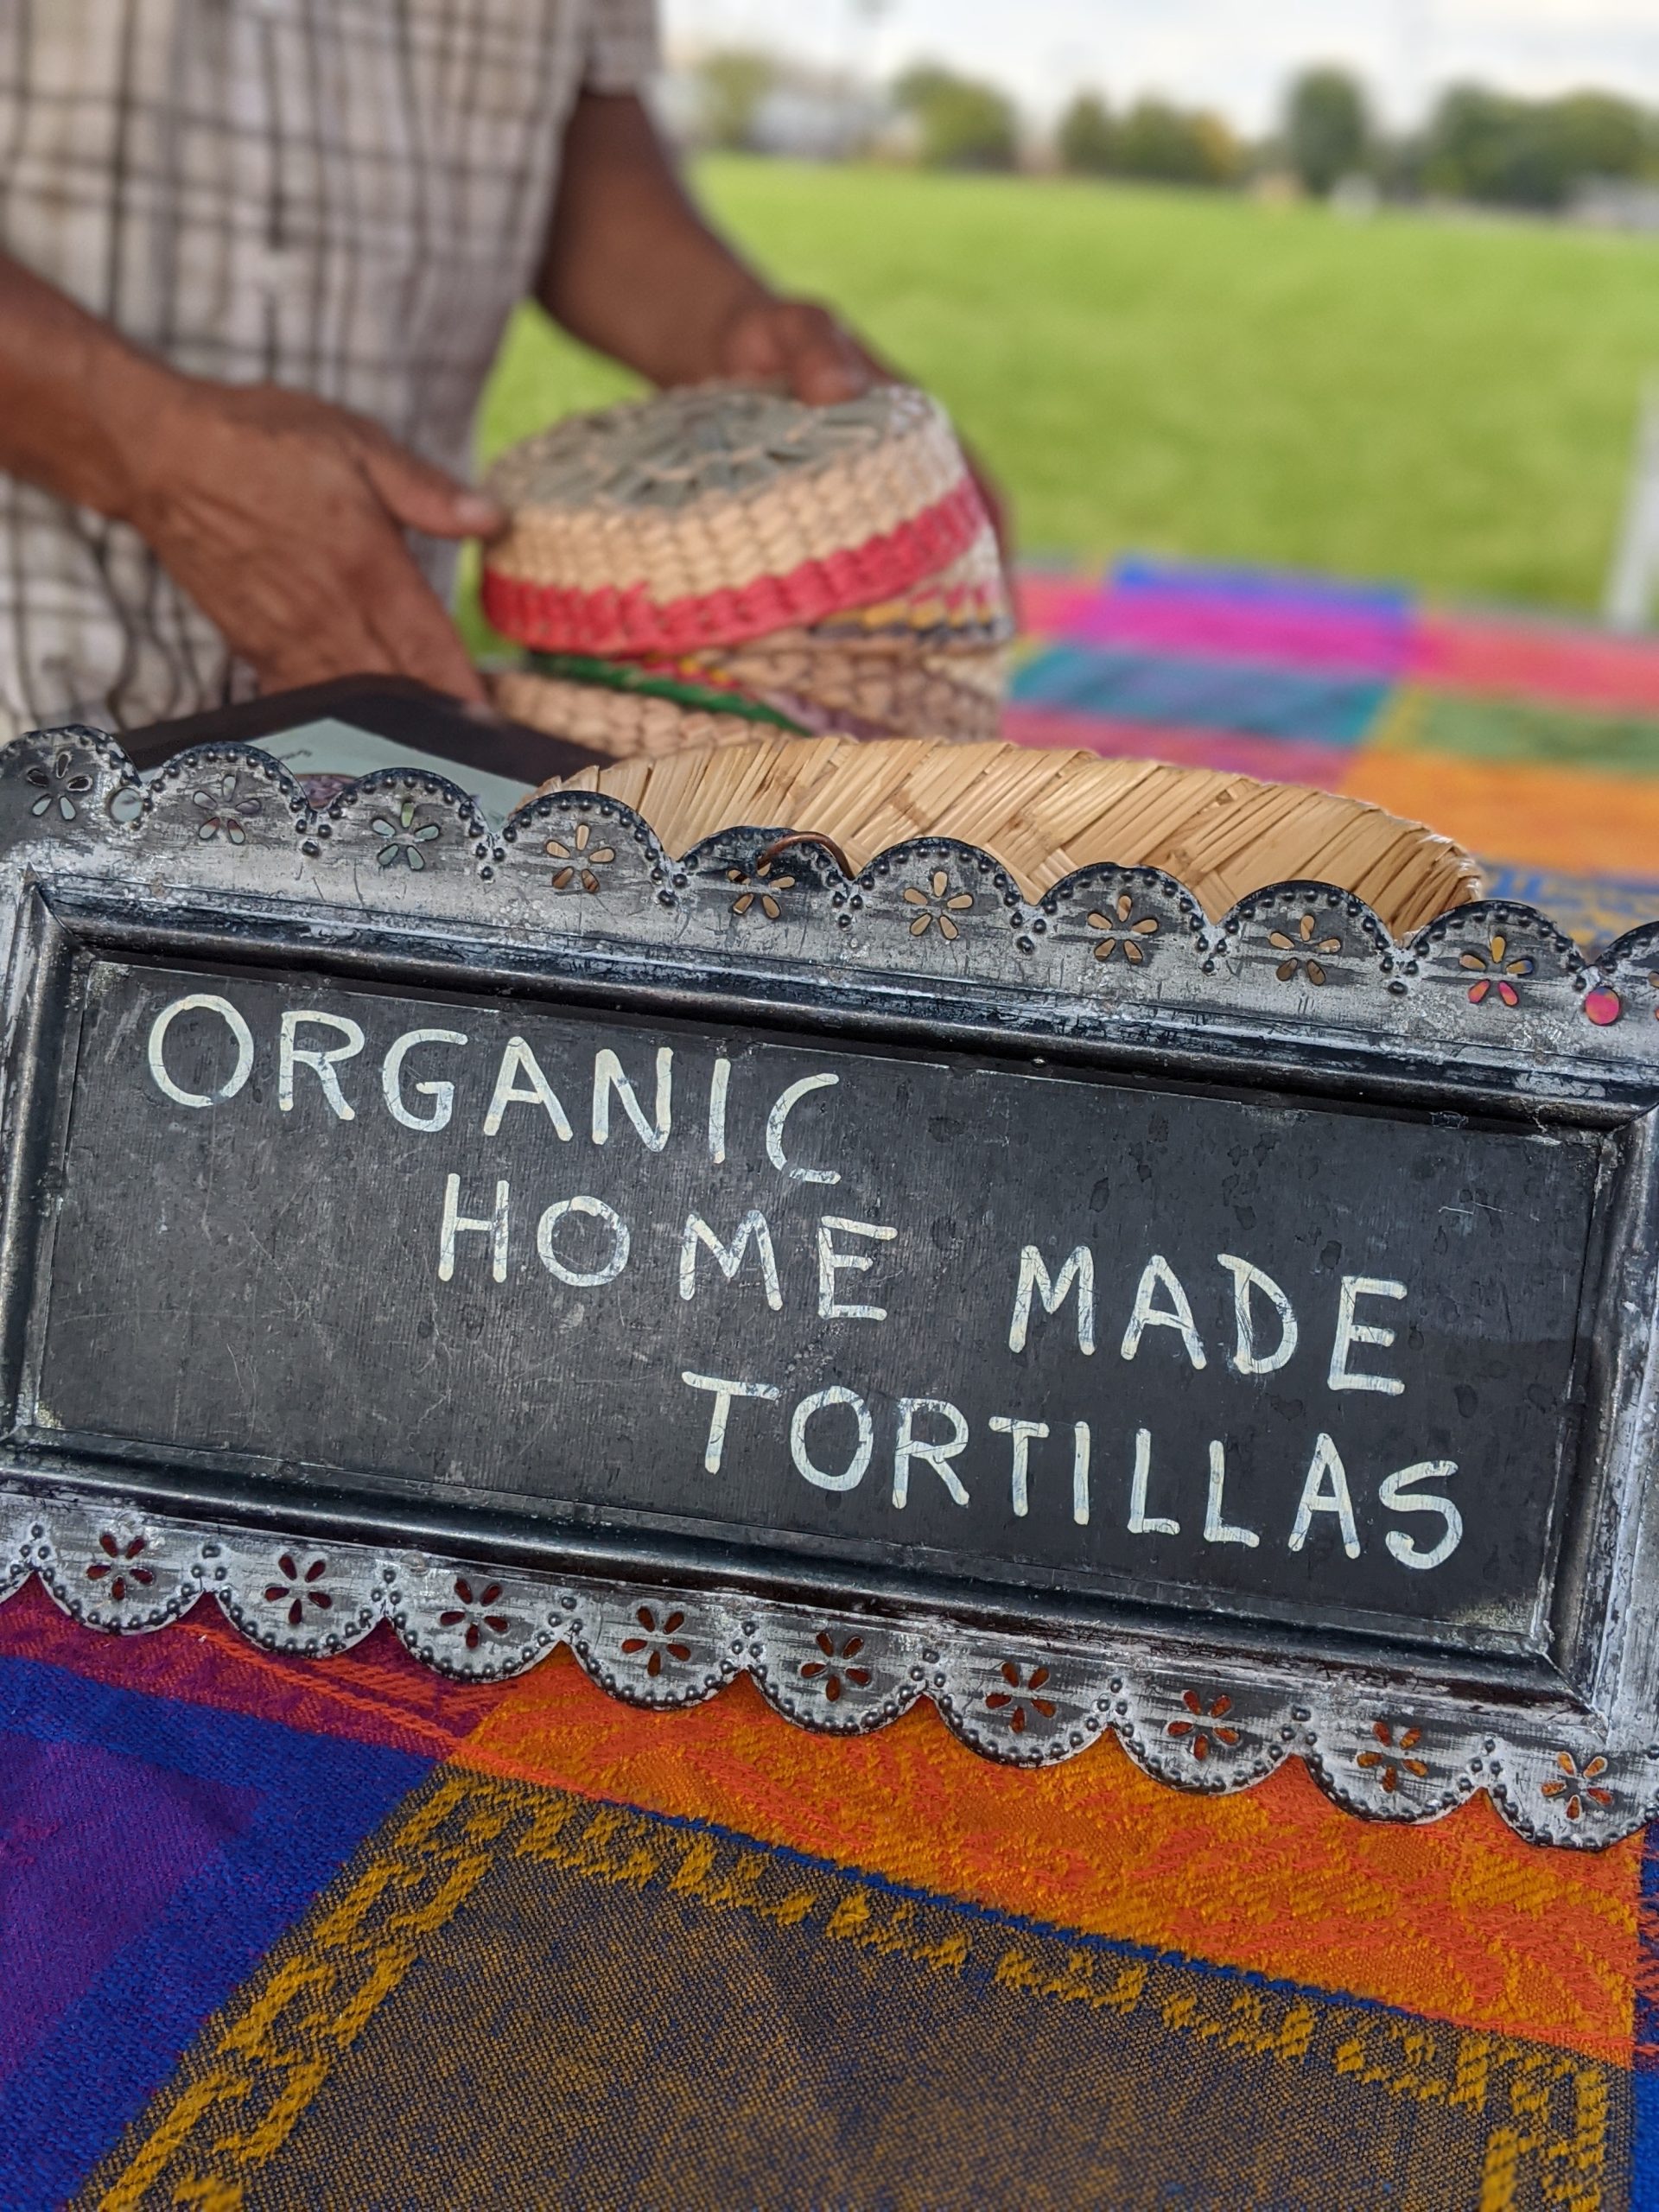 Chalkboard sign at farmers market that reads "Organic Home Made Tortillas"